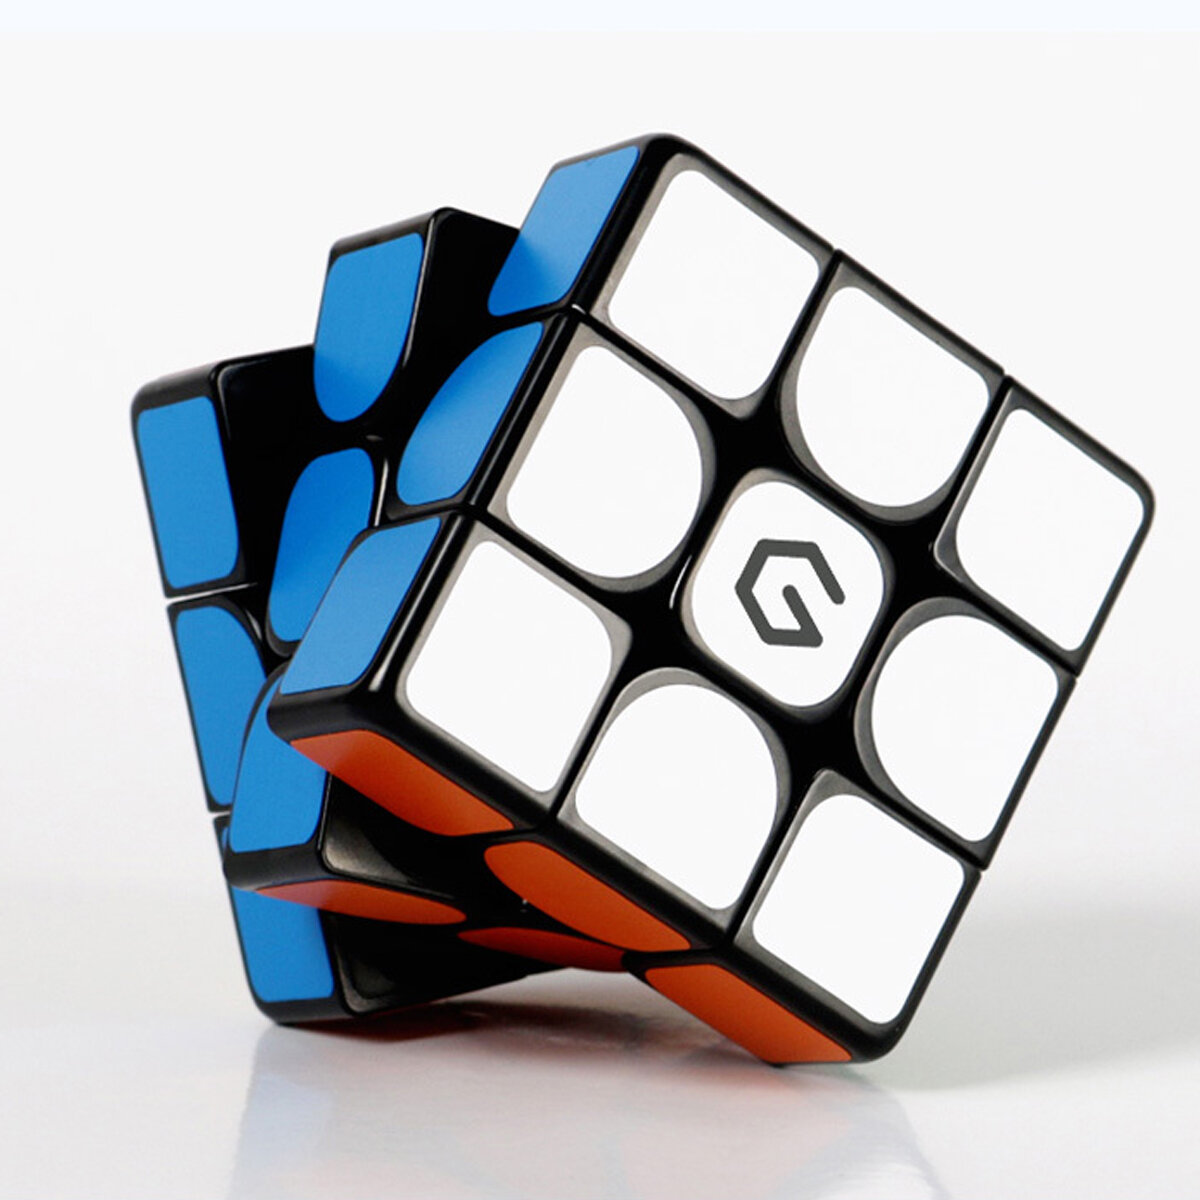 

Giiker M3 Magnetic Cube 3x3x3 Vivid Color Square Magic Cube Puzzle Science Education Toy Gift